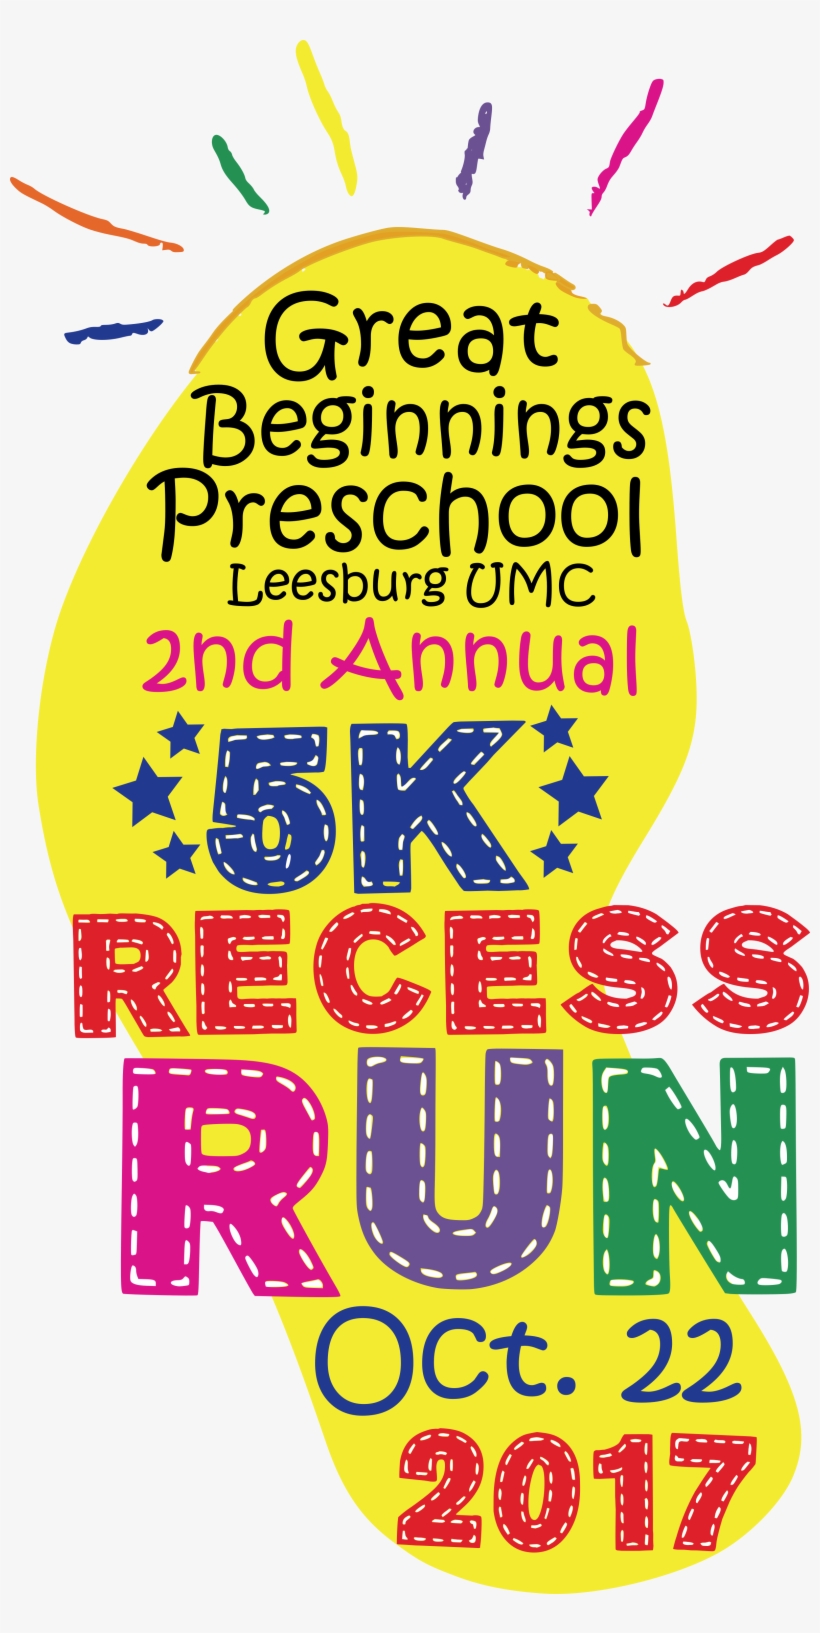 Register For The 2017 Great Beginnings Recess Run - Portable Network Graphics, transparent png #4330405